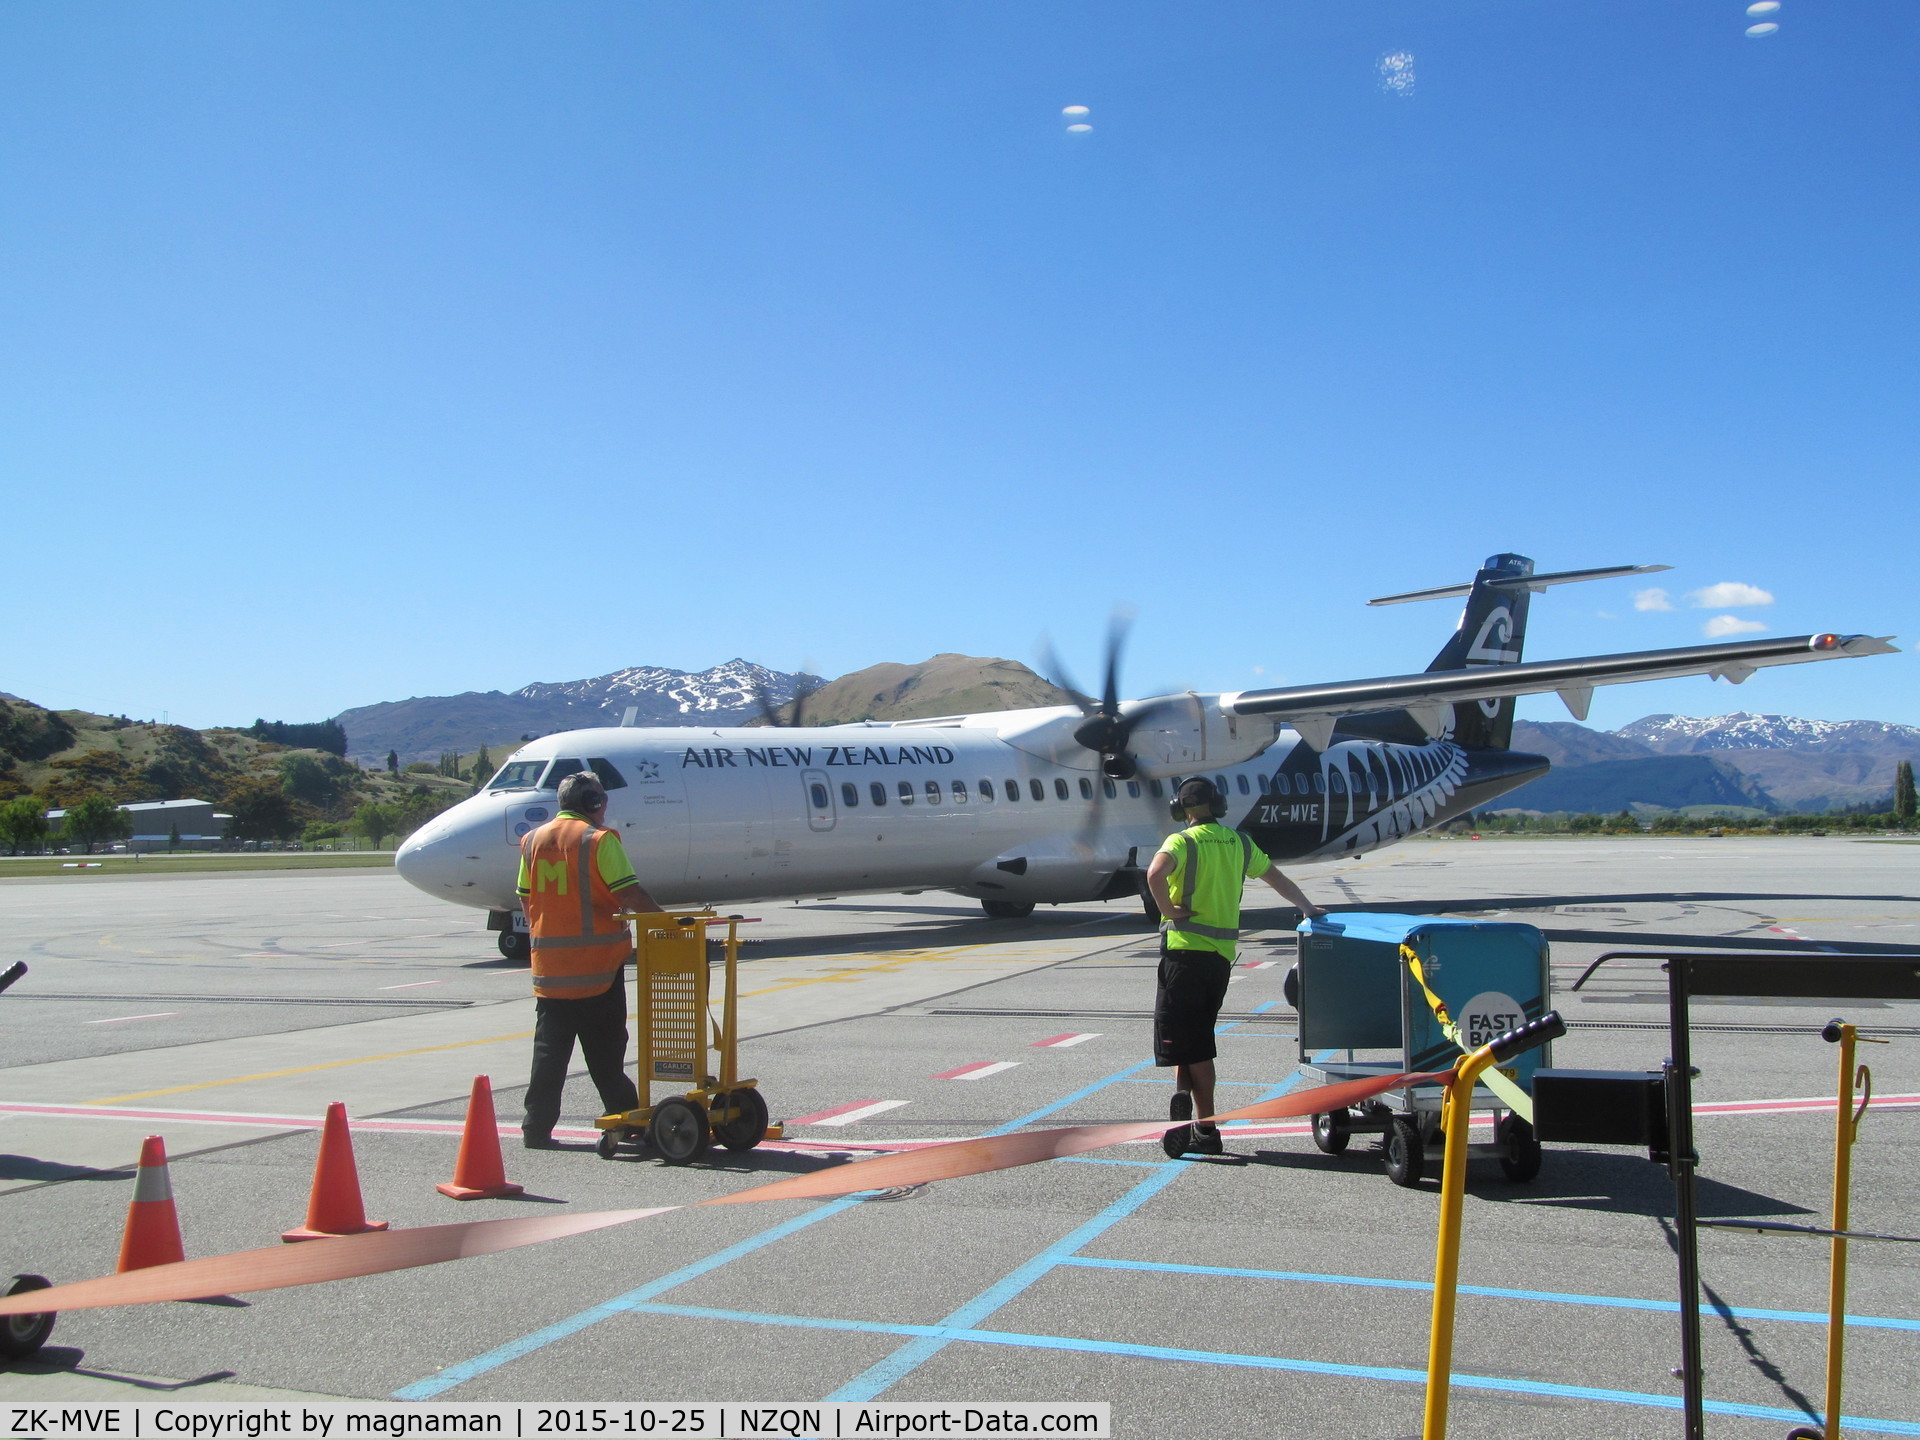 ZK-MVE, 2014 ATR 72-212A C/N 1182, taxying in